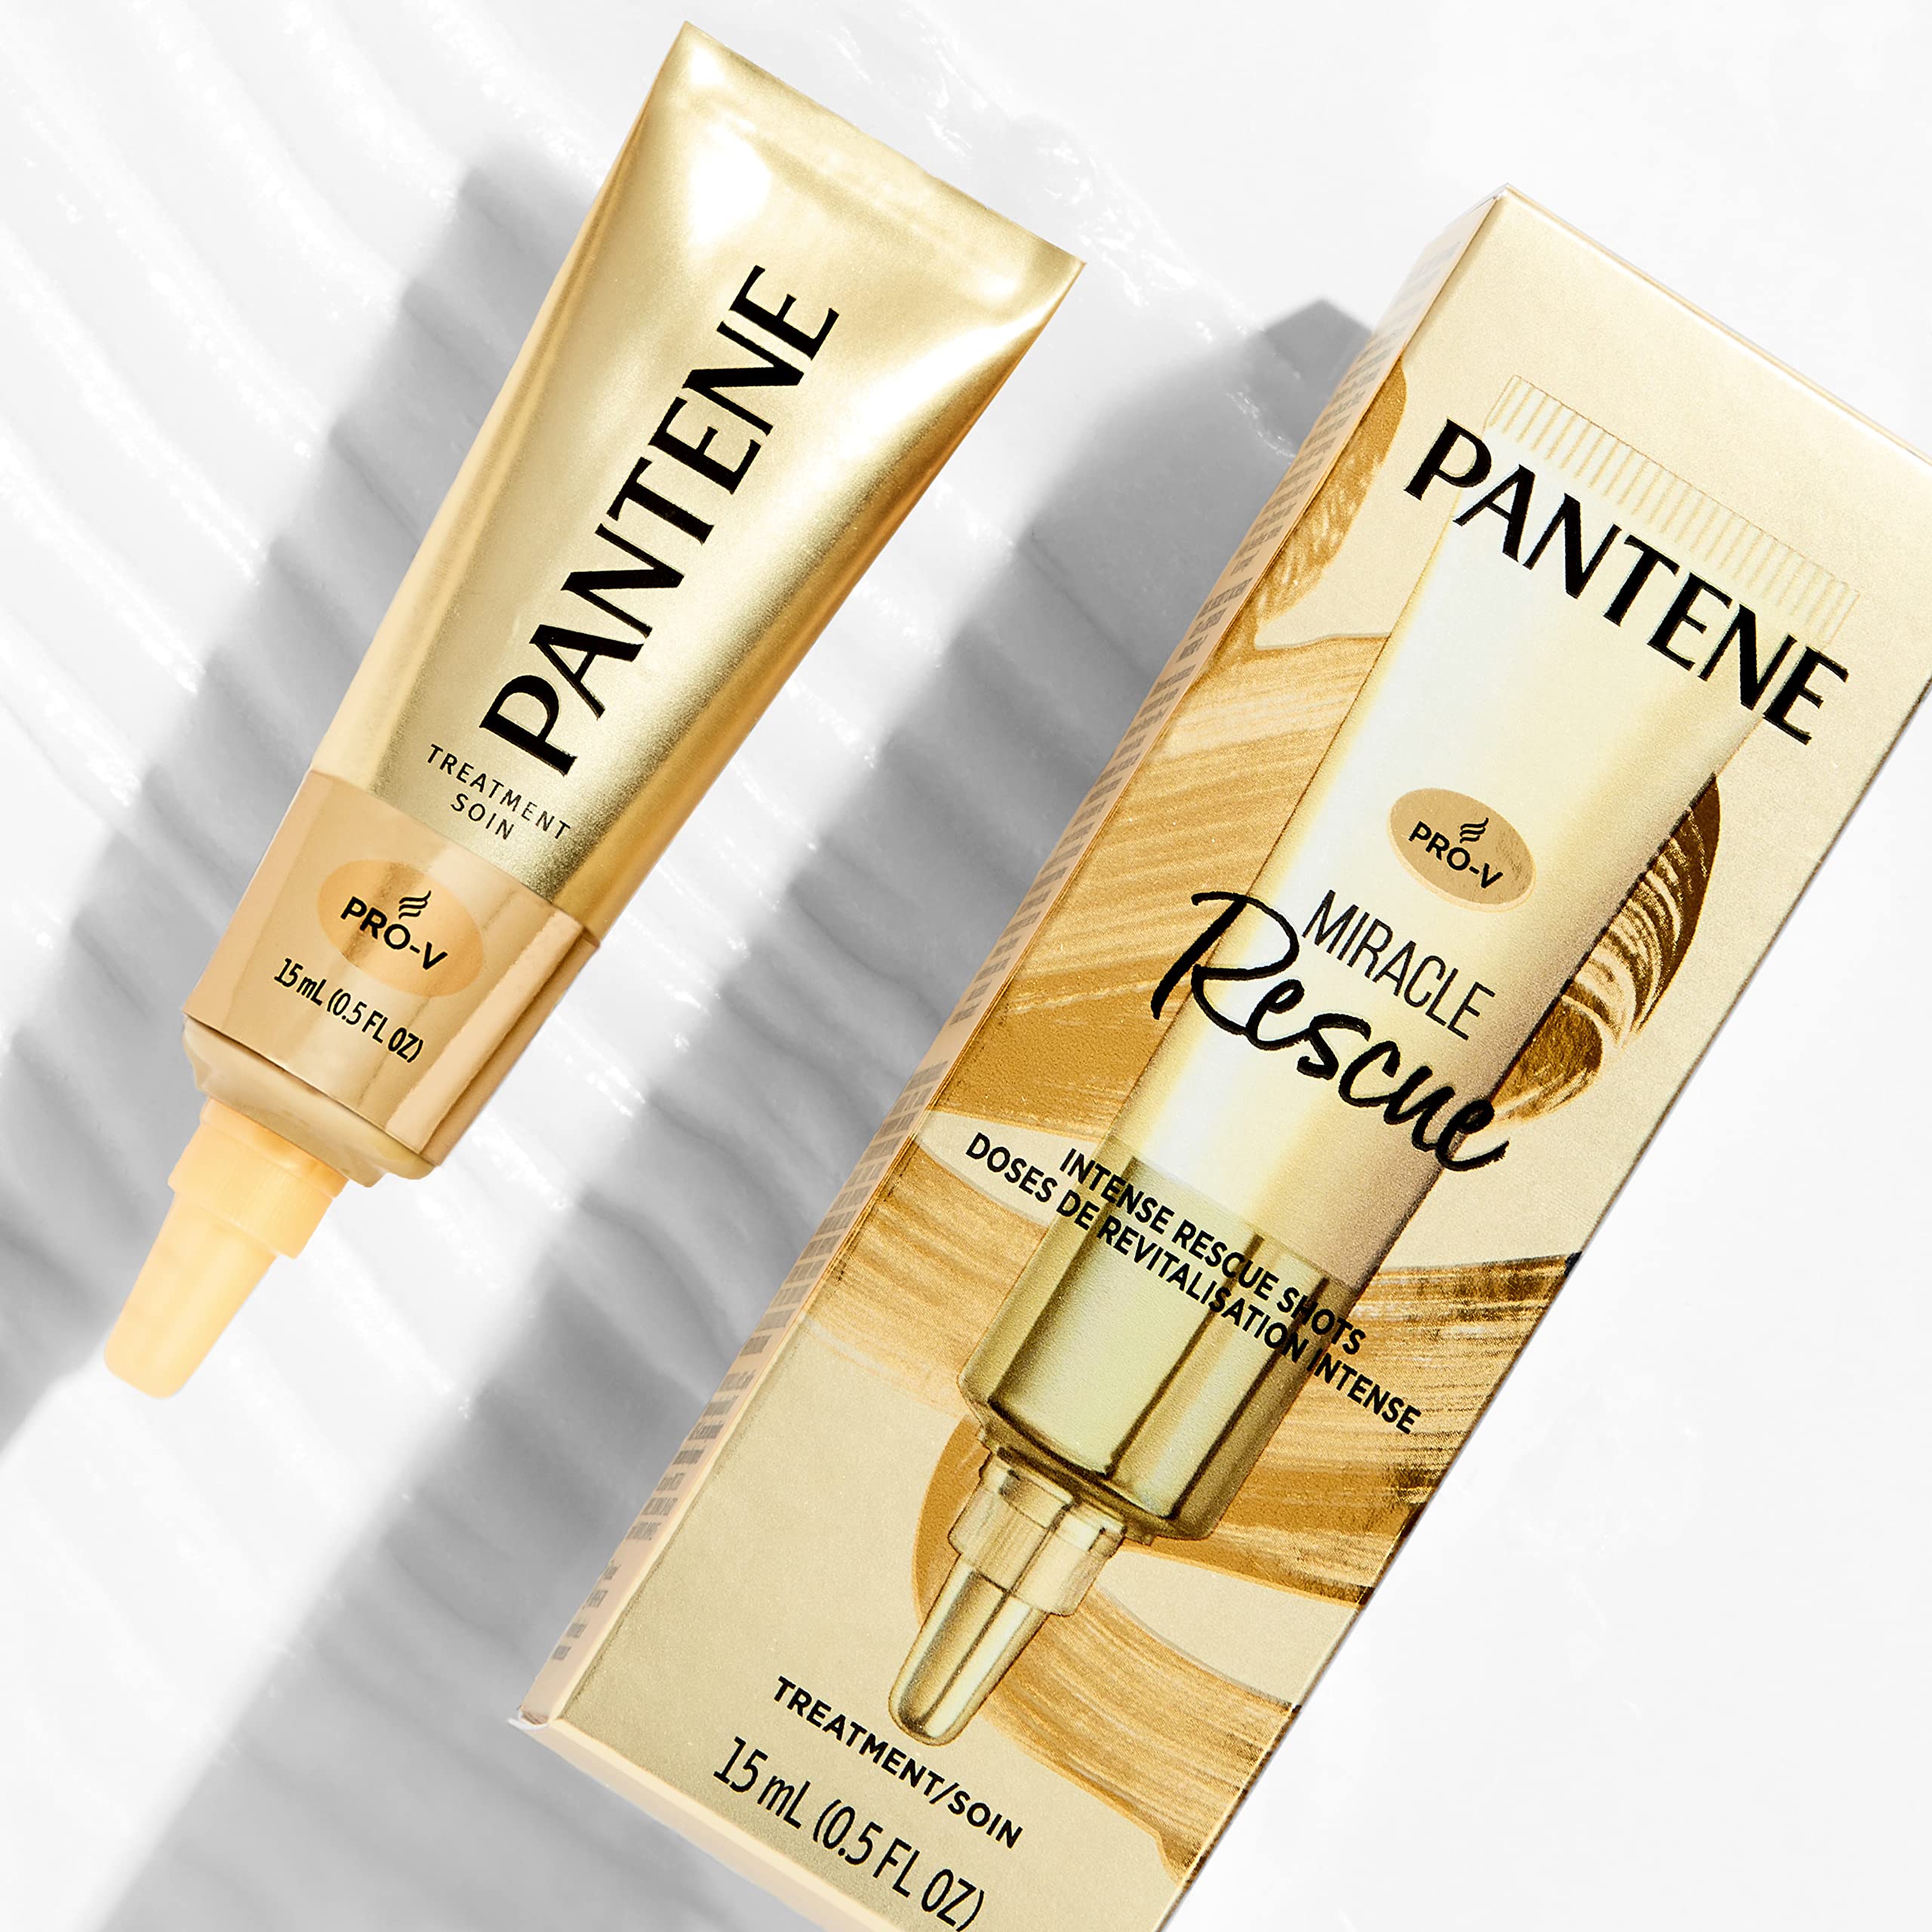 Pantene Shampoo, Conditioner and Hair Treatment Set, Smooth and Sleek for Frizz Control, Safe for Color-Treated Hair